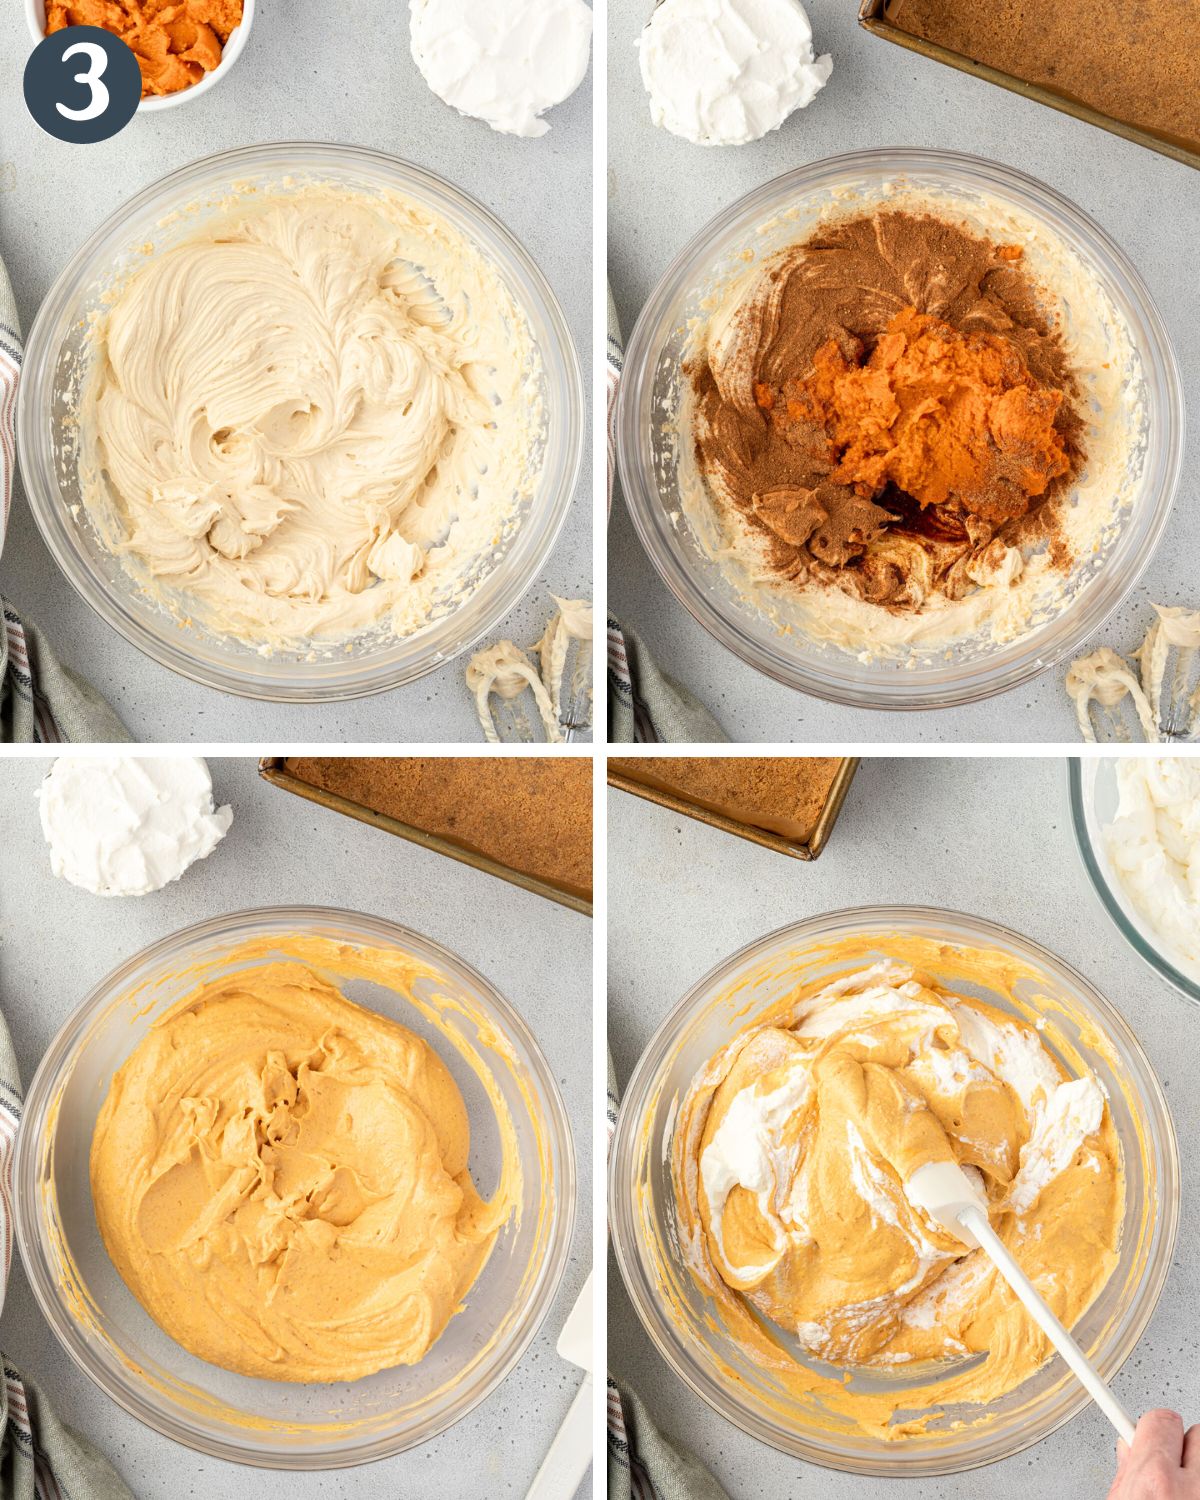 4 images showing the process of mixing pumpkin and spices into the cream cheese, then folding the whipped cream in.